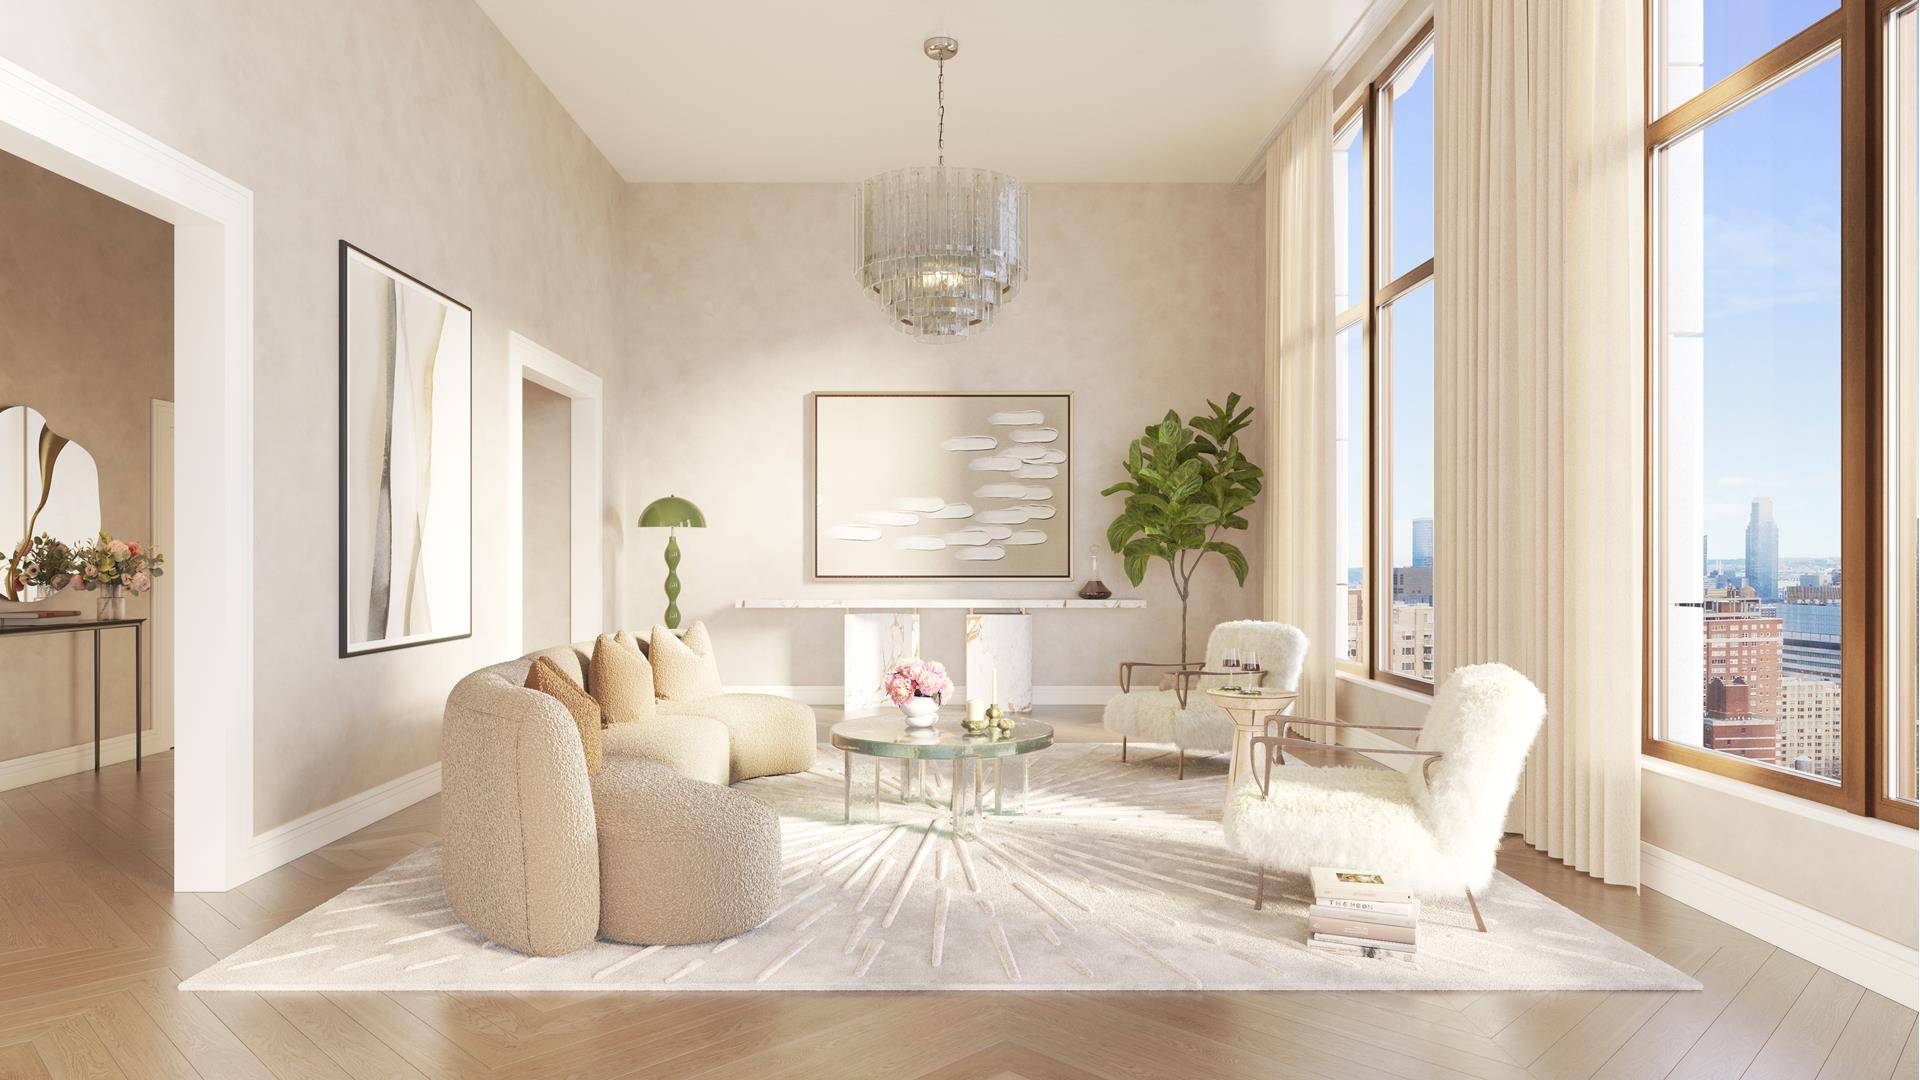 Introducing THE 74, where modernity meets the timeless sophistication on Manhattan's Upper East Side.